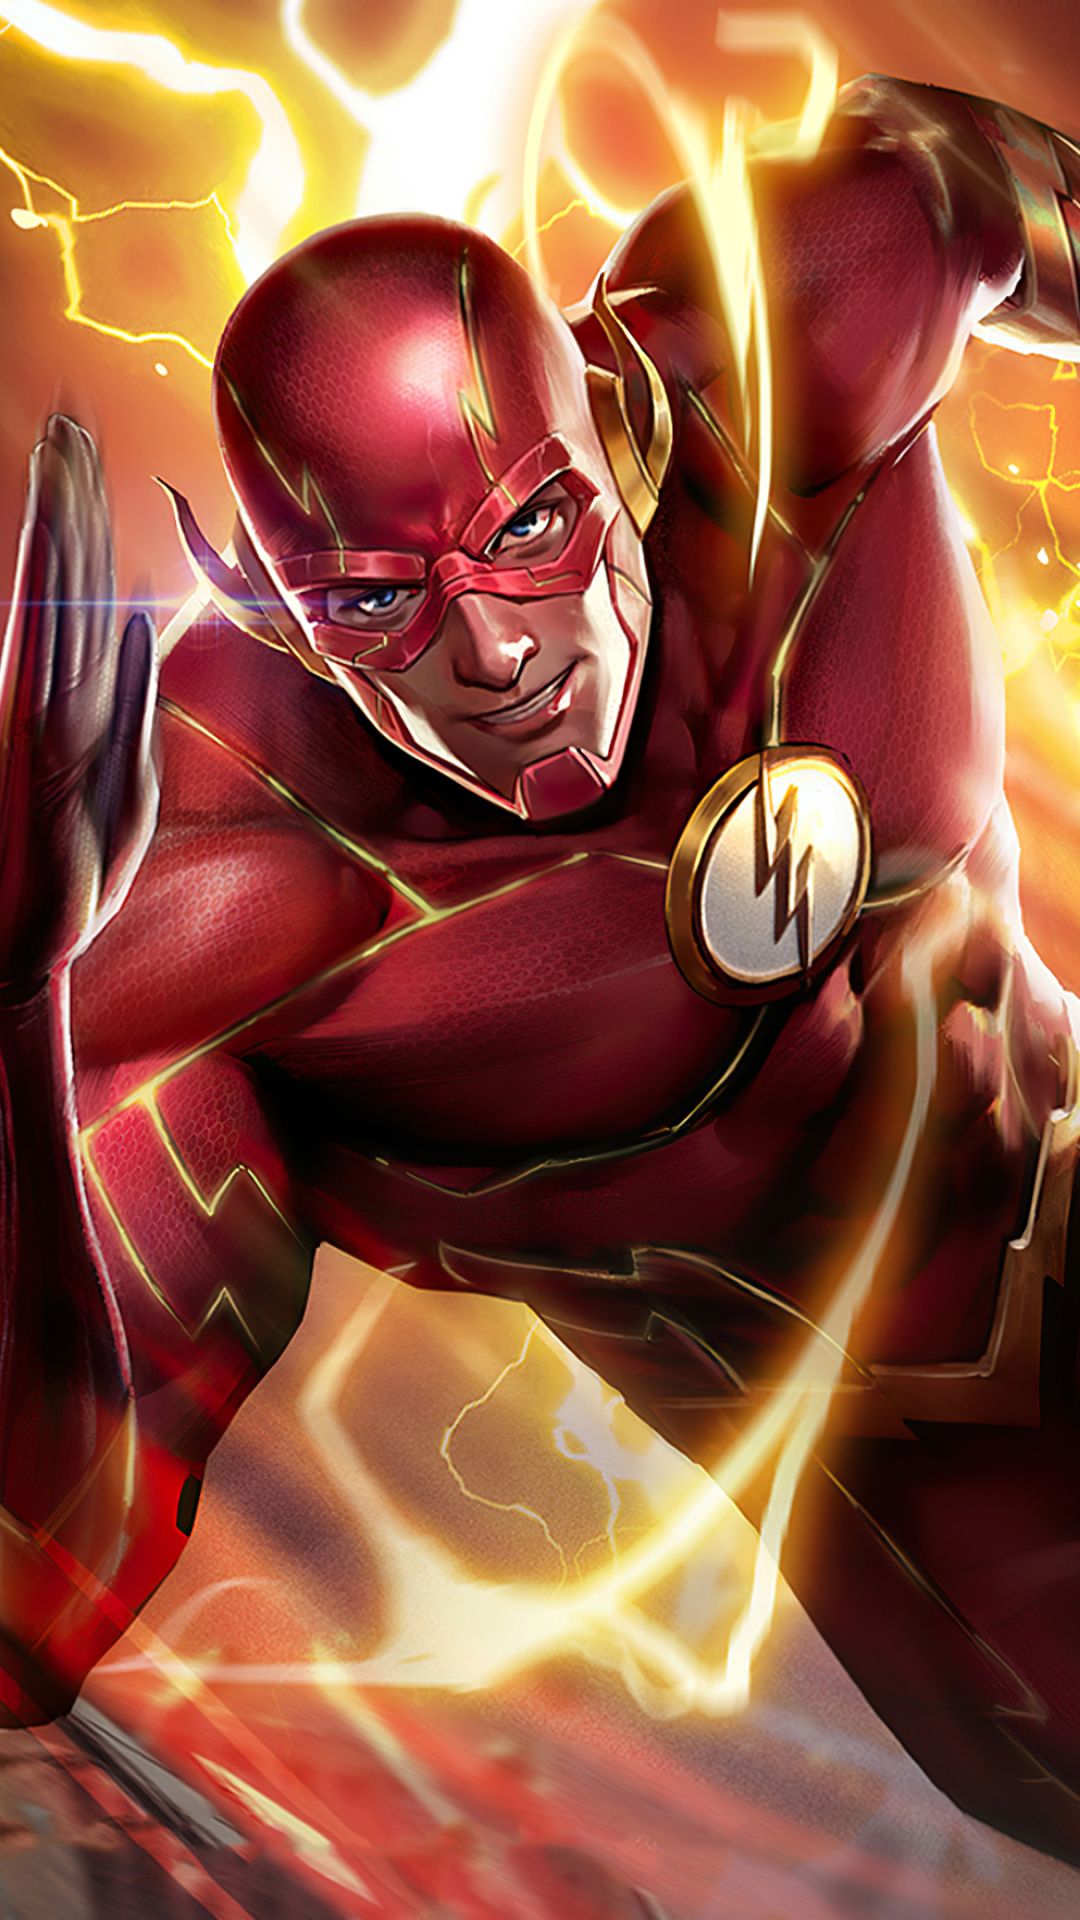 video game, arena of valor, barry allen, dc comics, flash Full HD